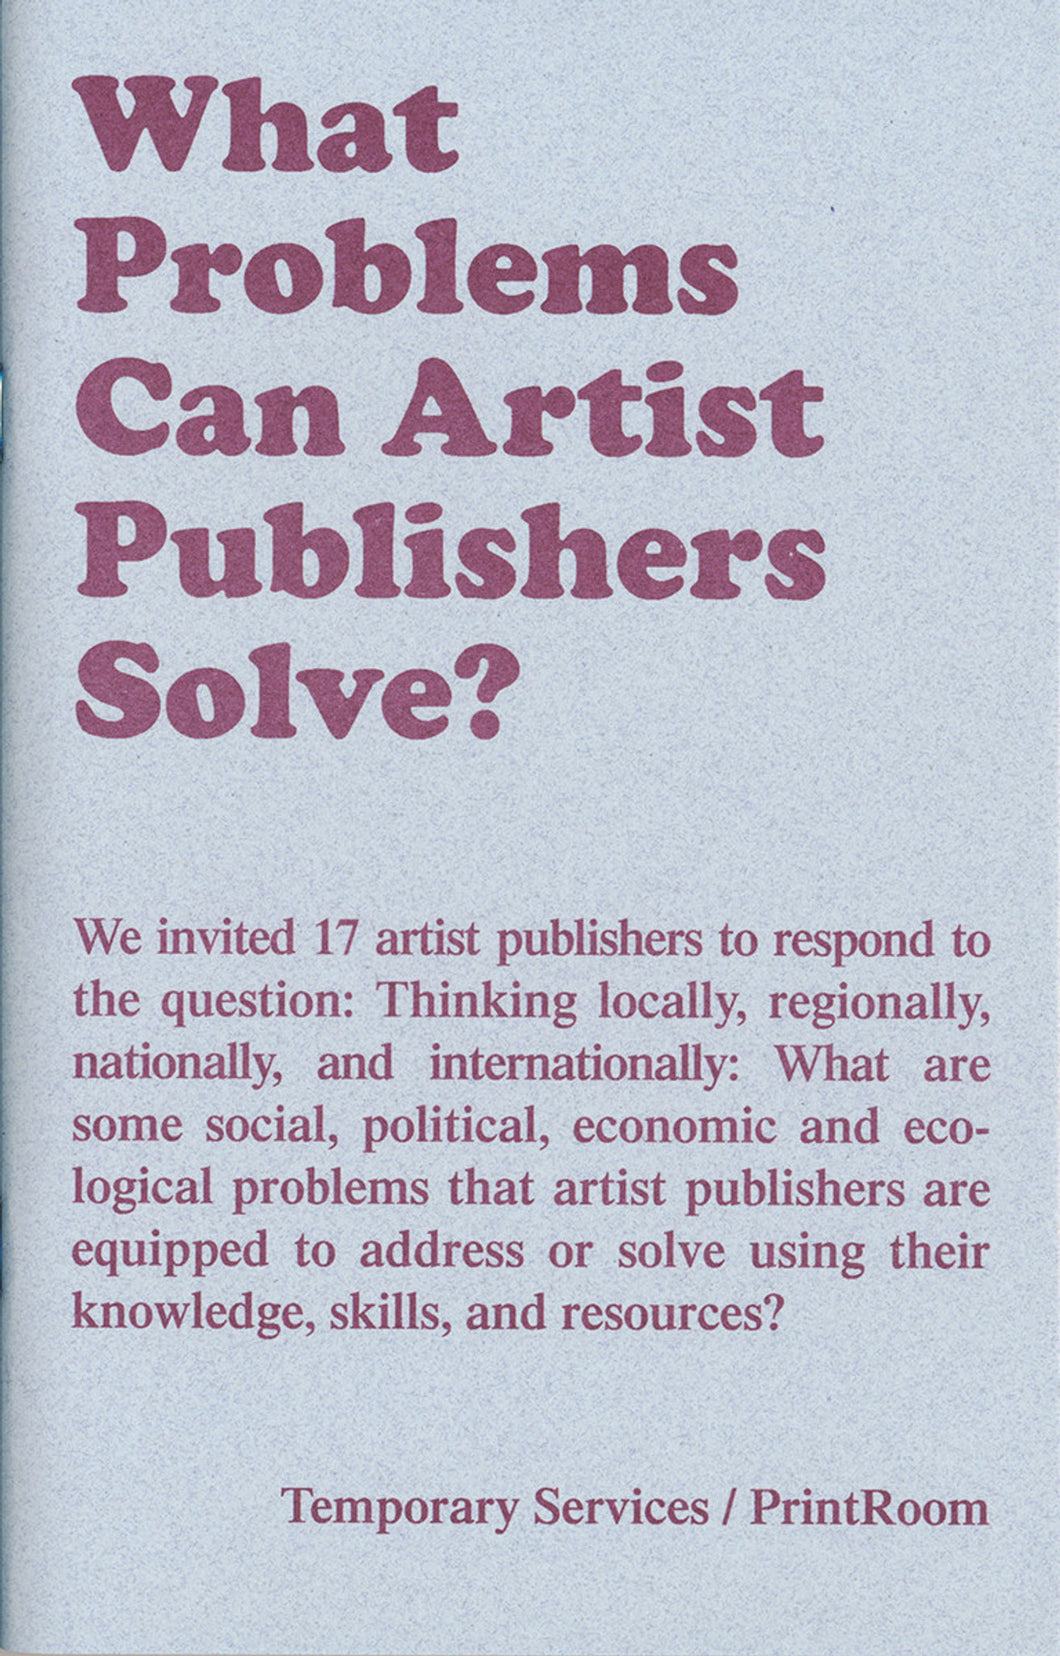 What Problems Can Artists Solve?